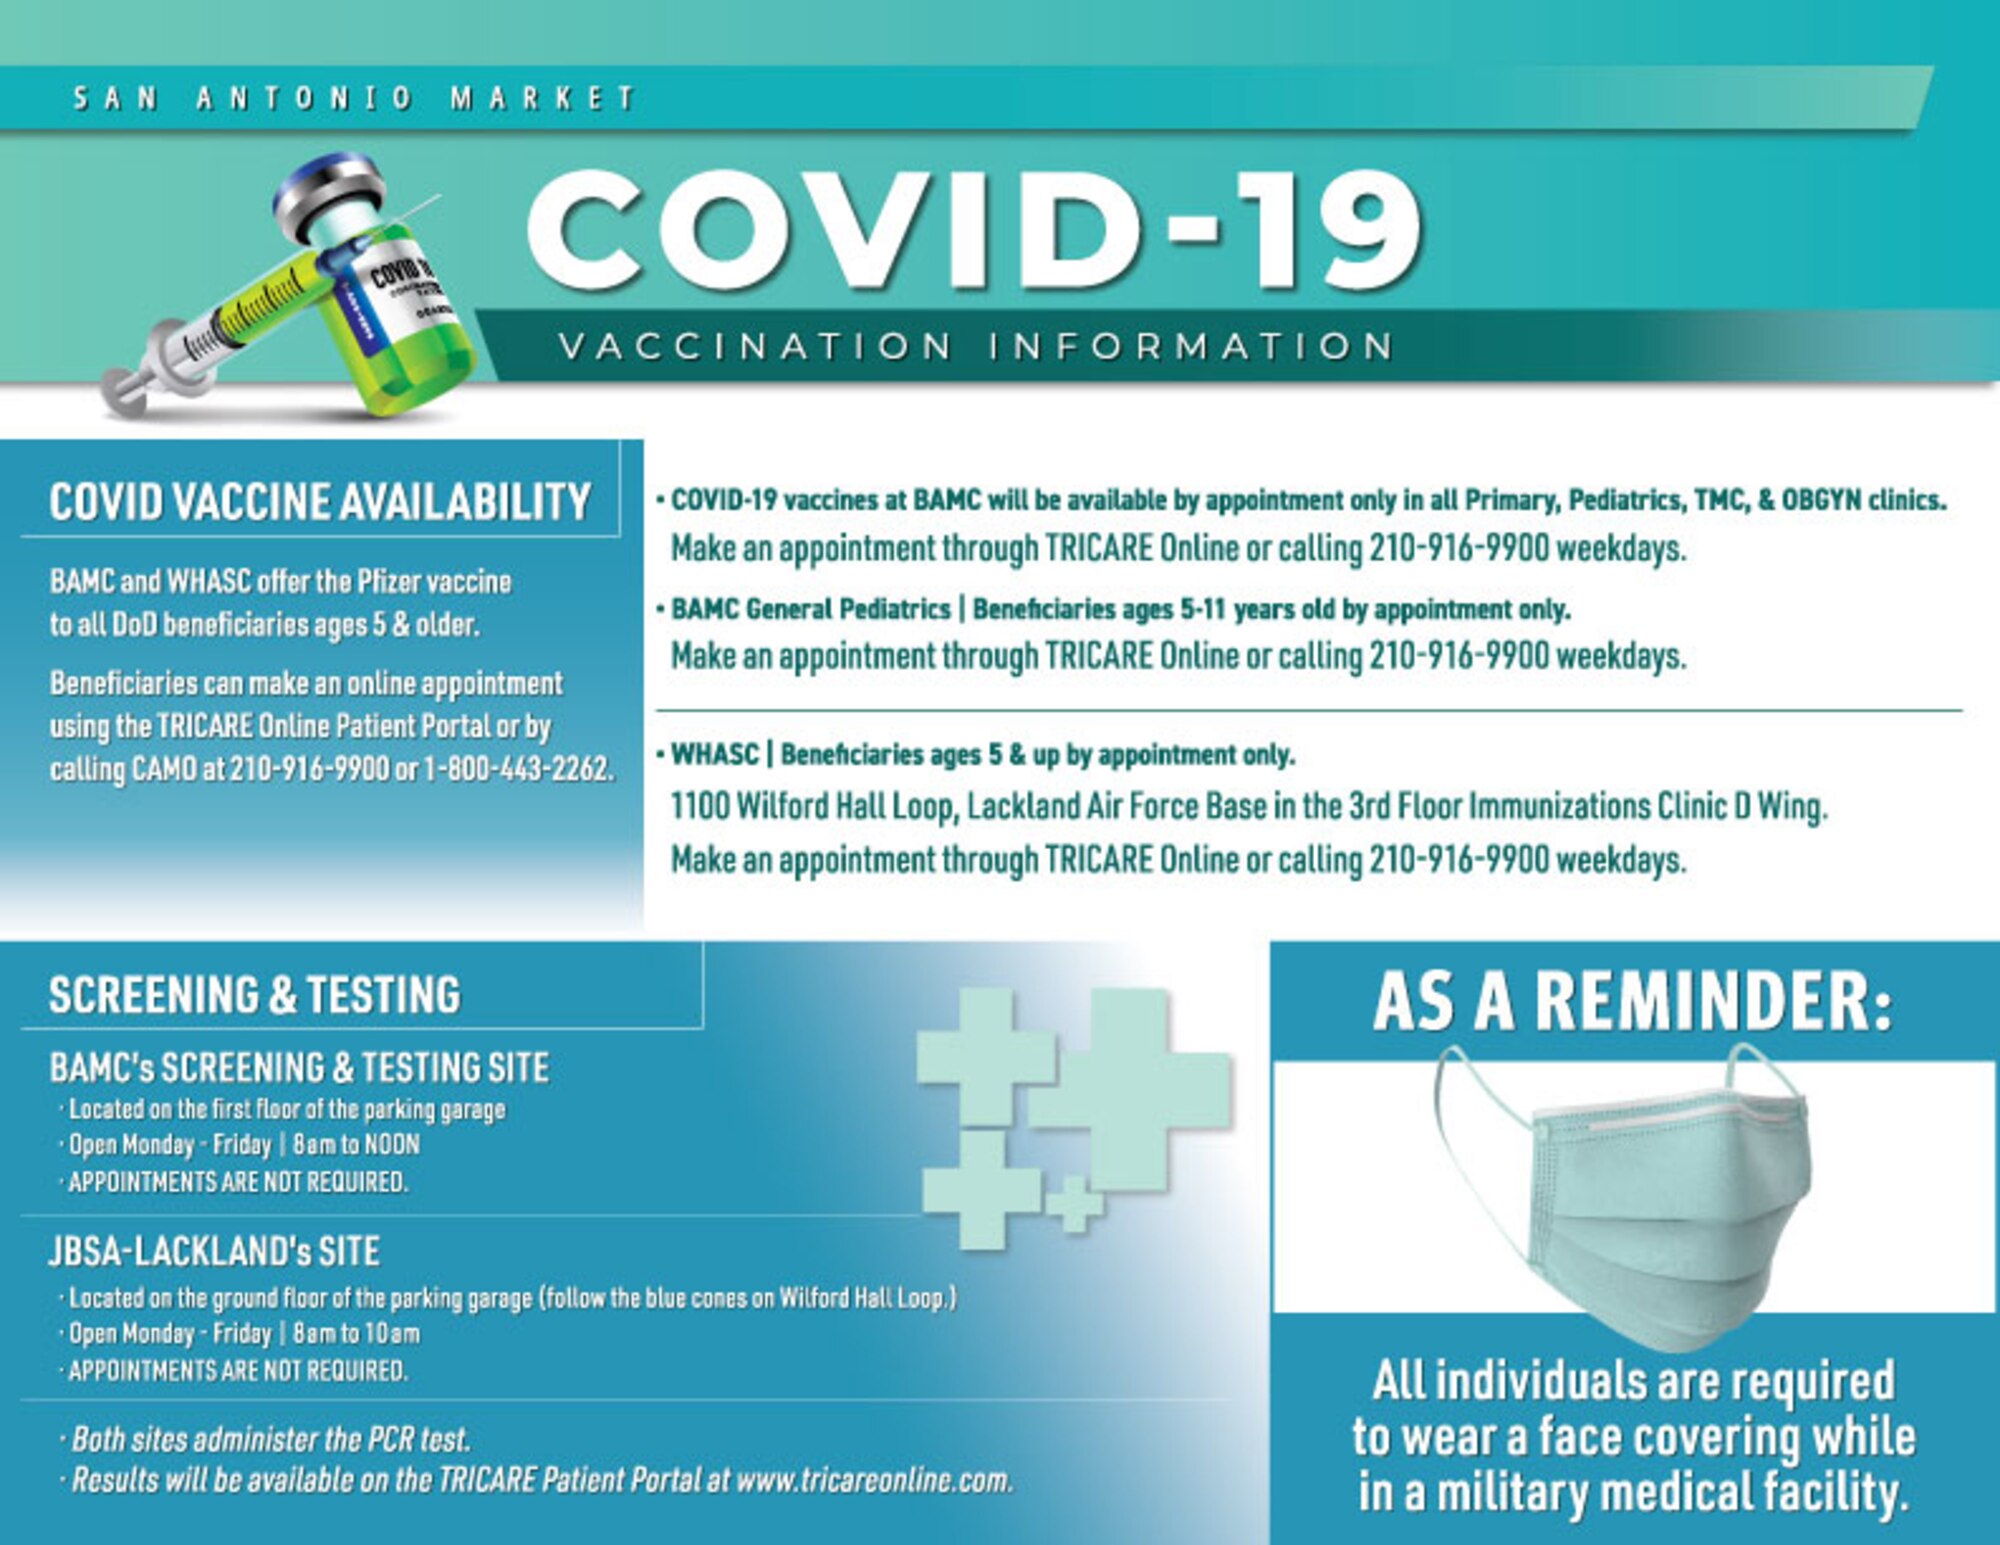 The community is experiencing very high levels of COVID-19 transmission related to the Omicron variant.